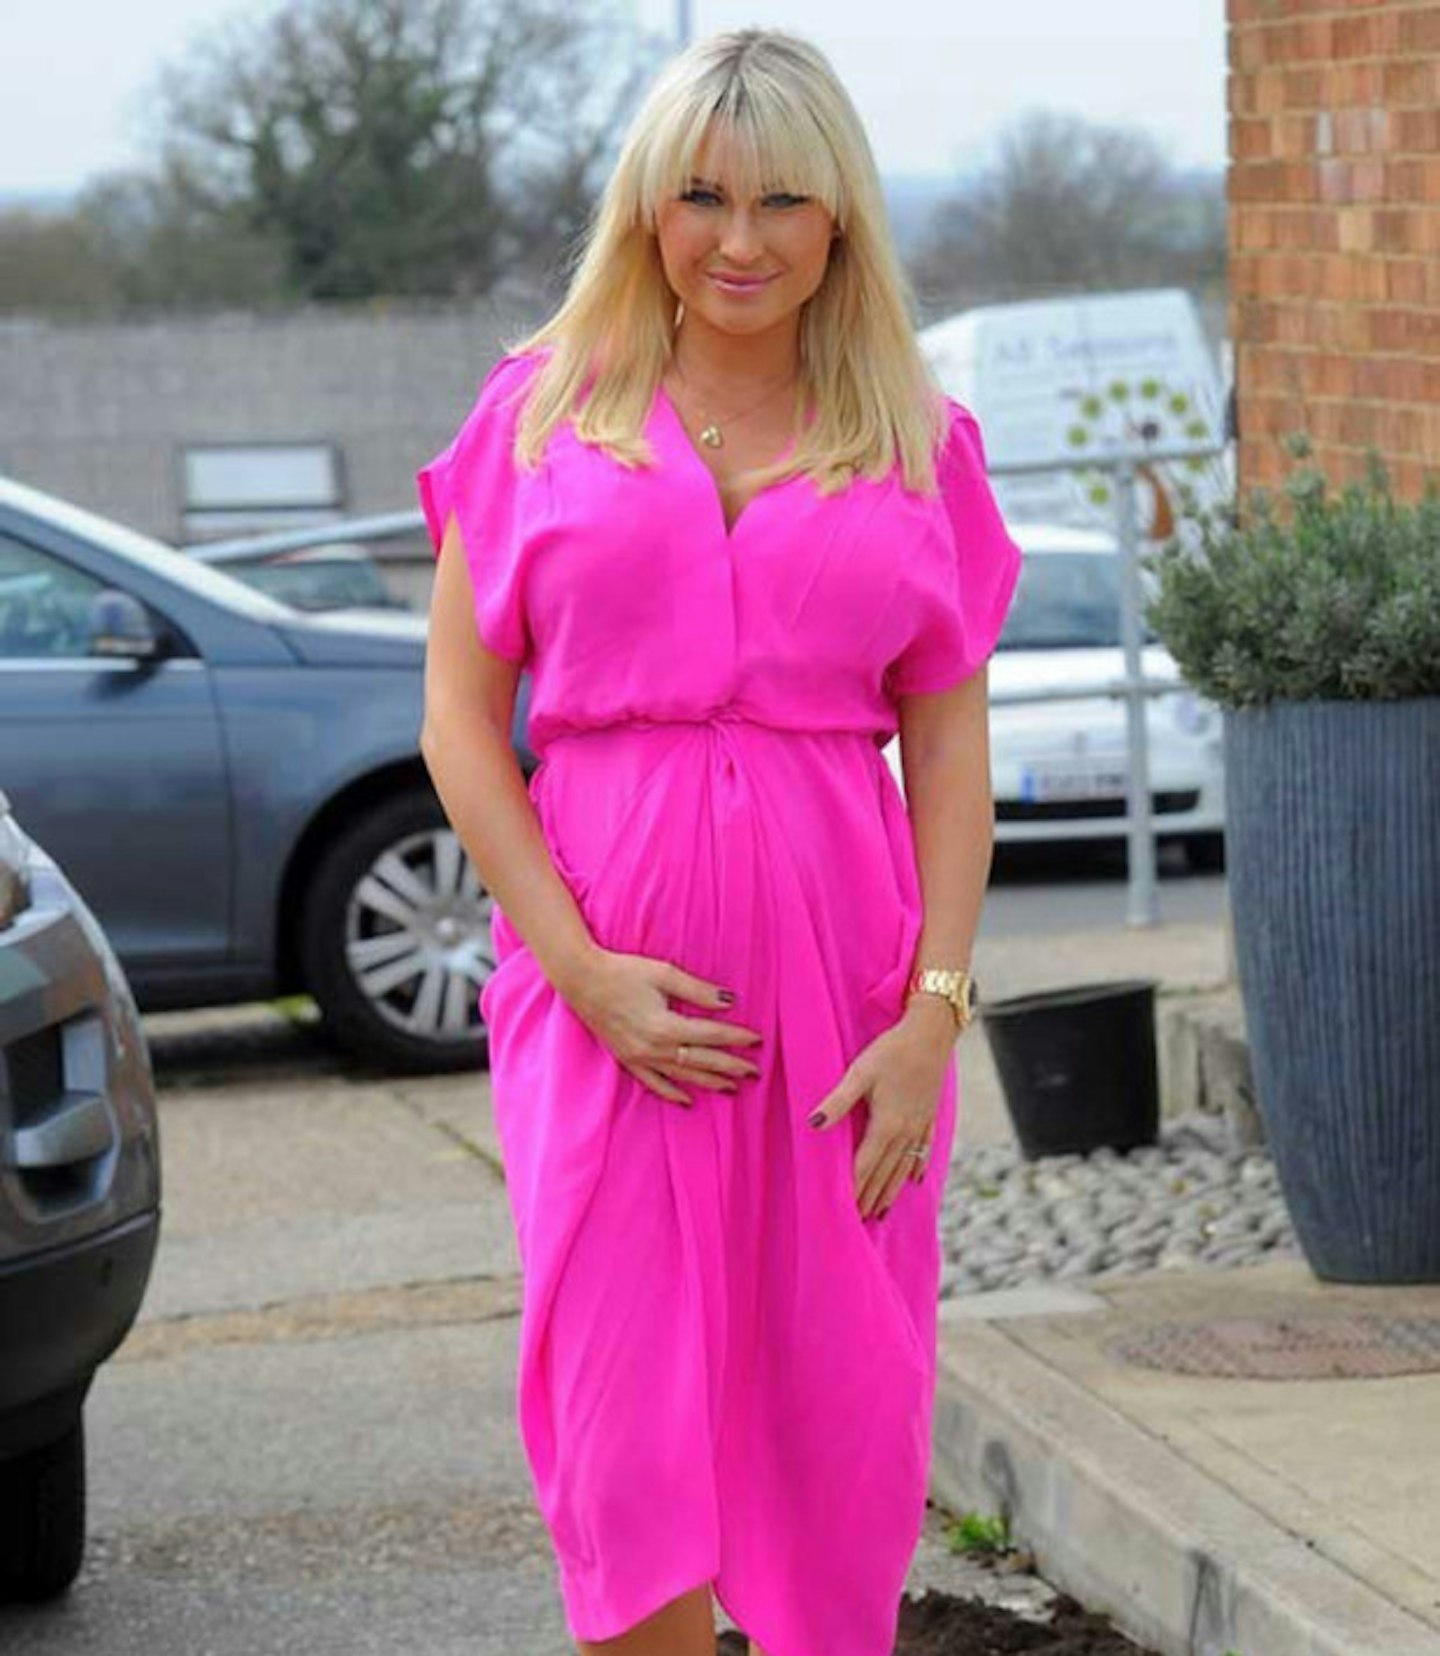 July 2014: Billie Faiers welcomed daughter Nellie